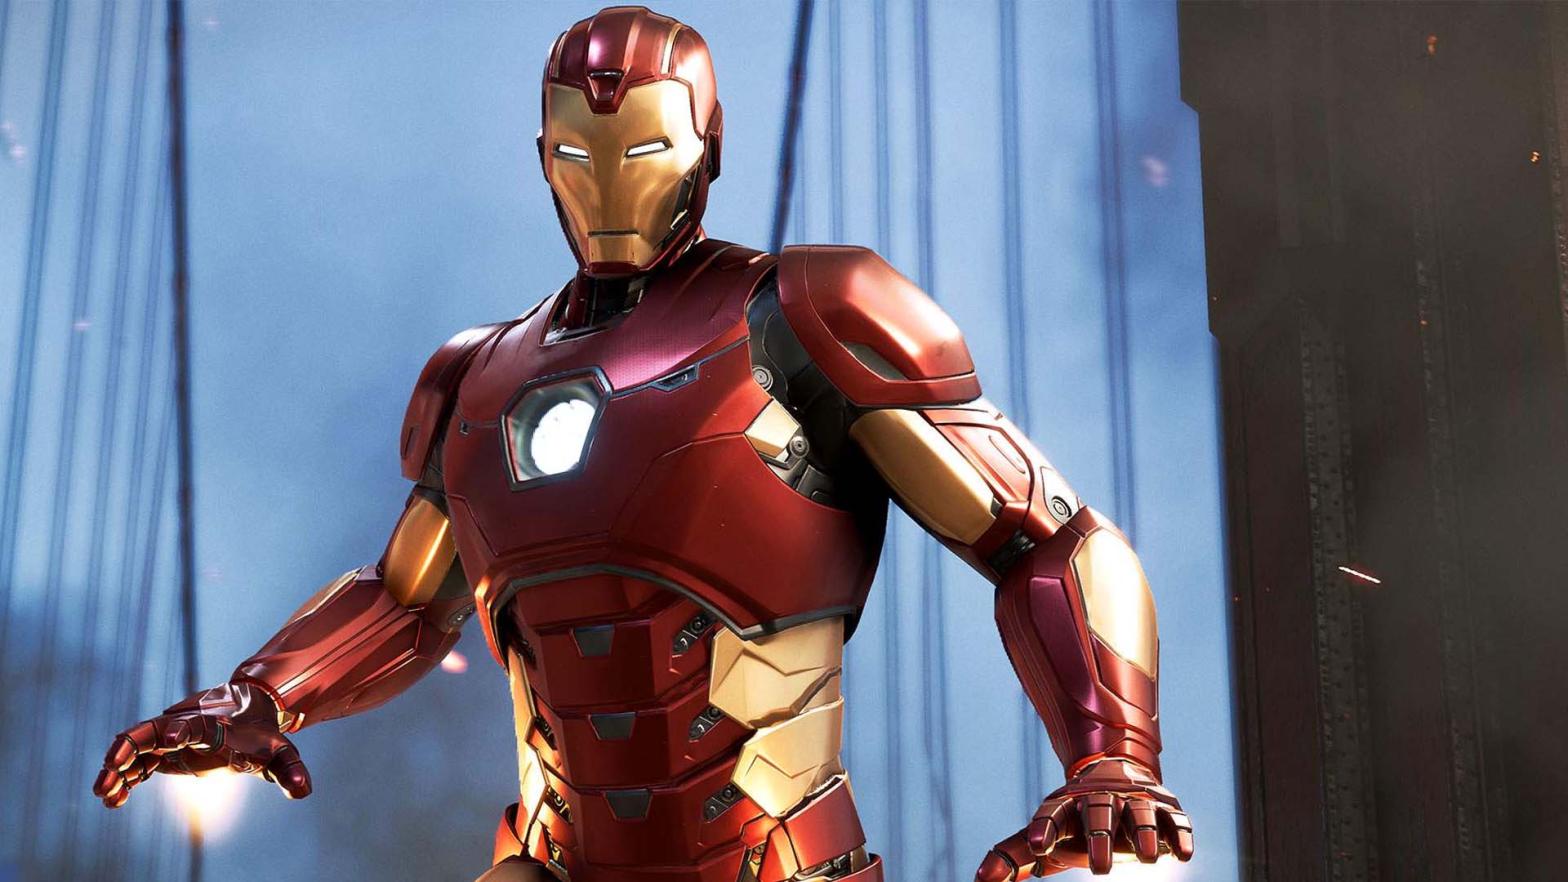 Iron Man as seen in Square Enix's Avengers game.  (Image: Square Enix / Marvel)